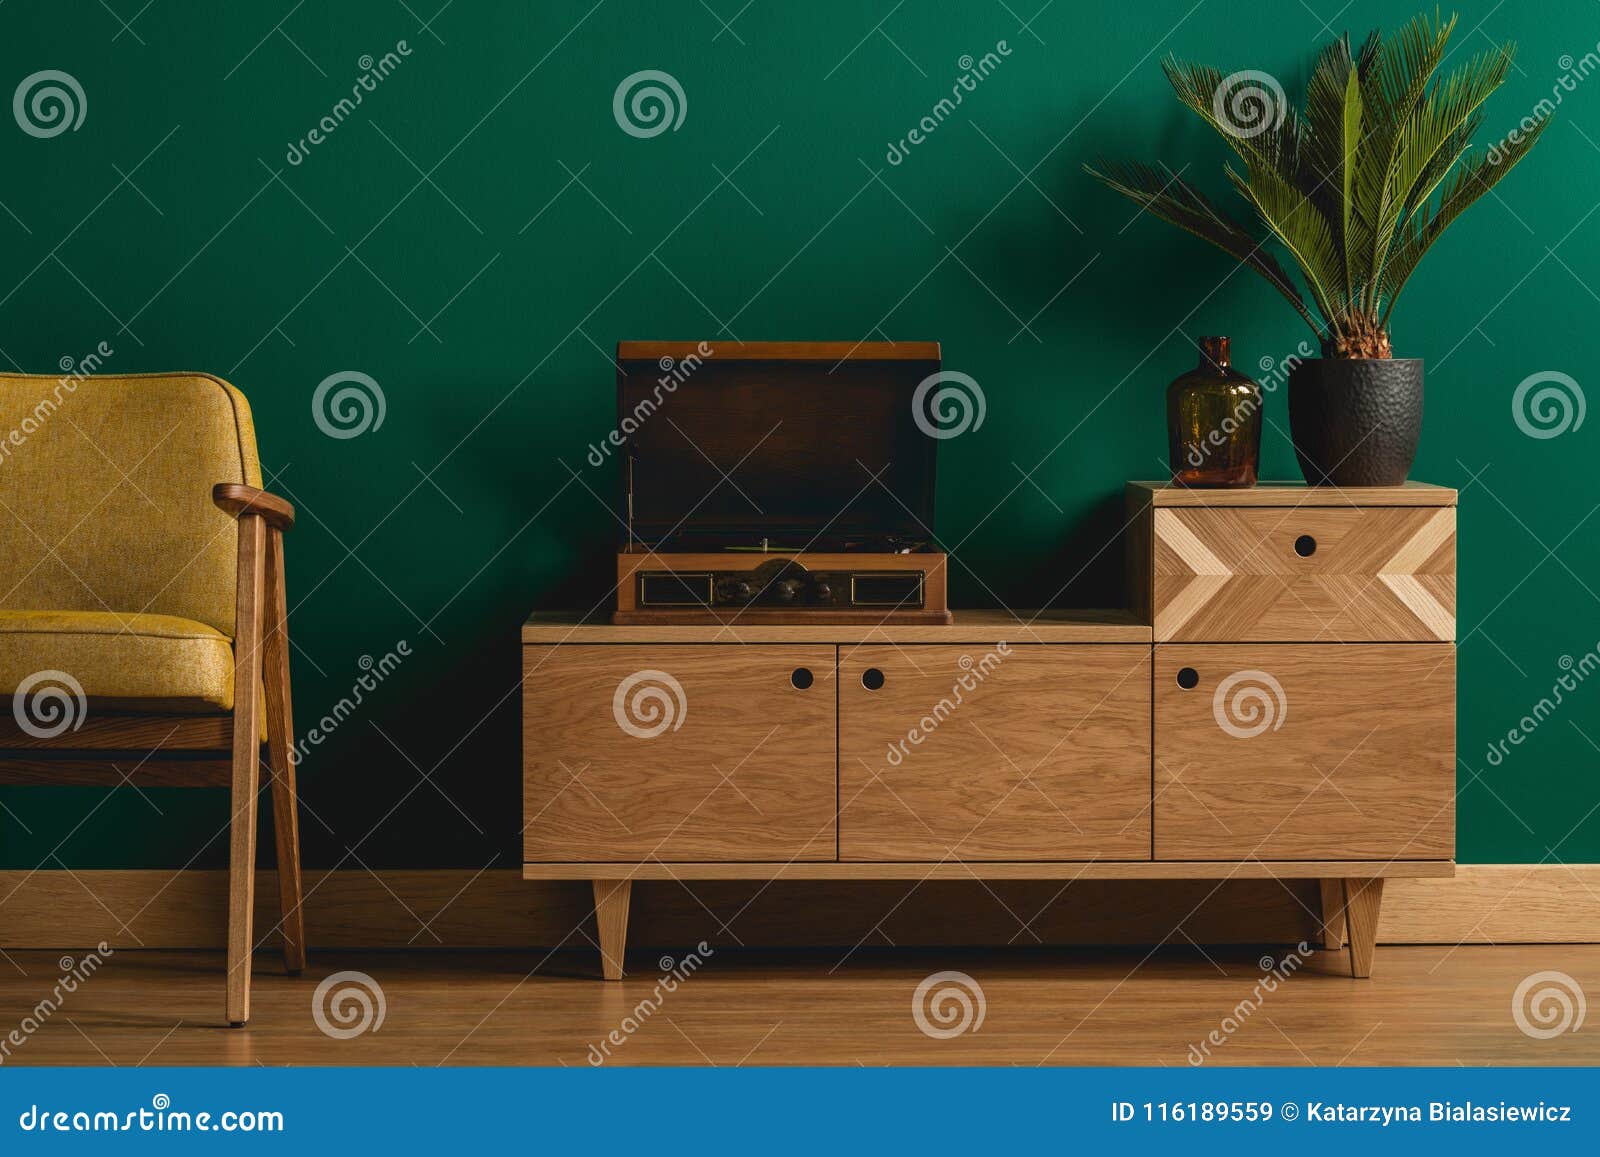 Wooden Dresser With Record Player Stock Image Image Of Home